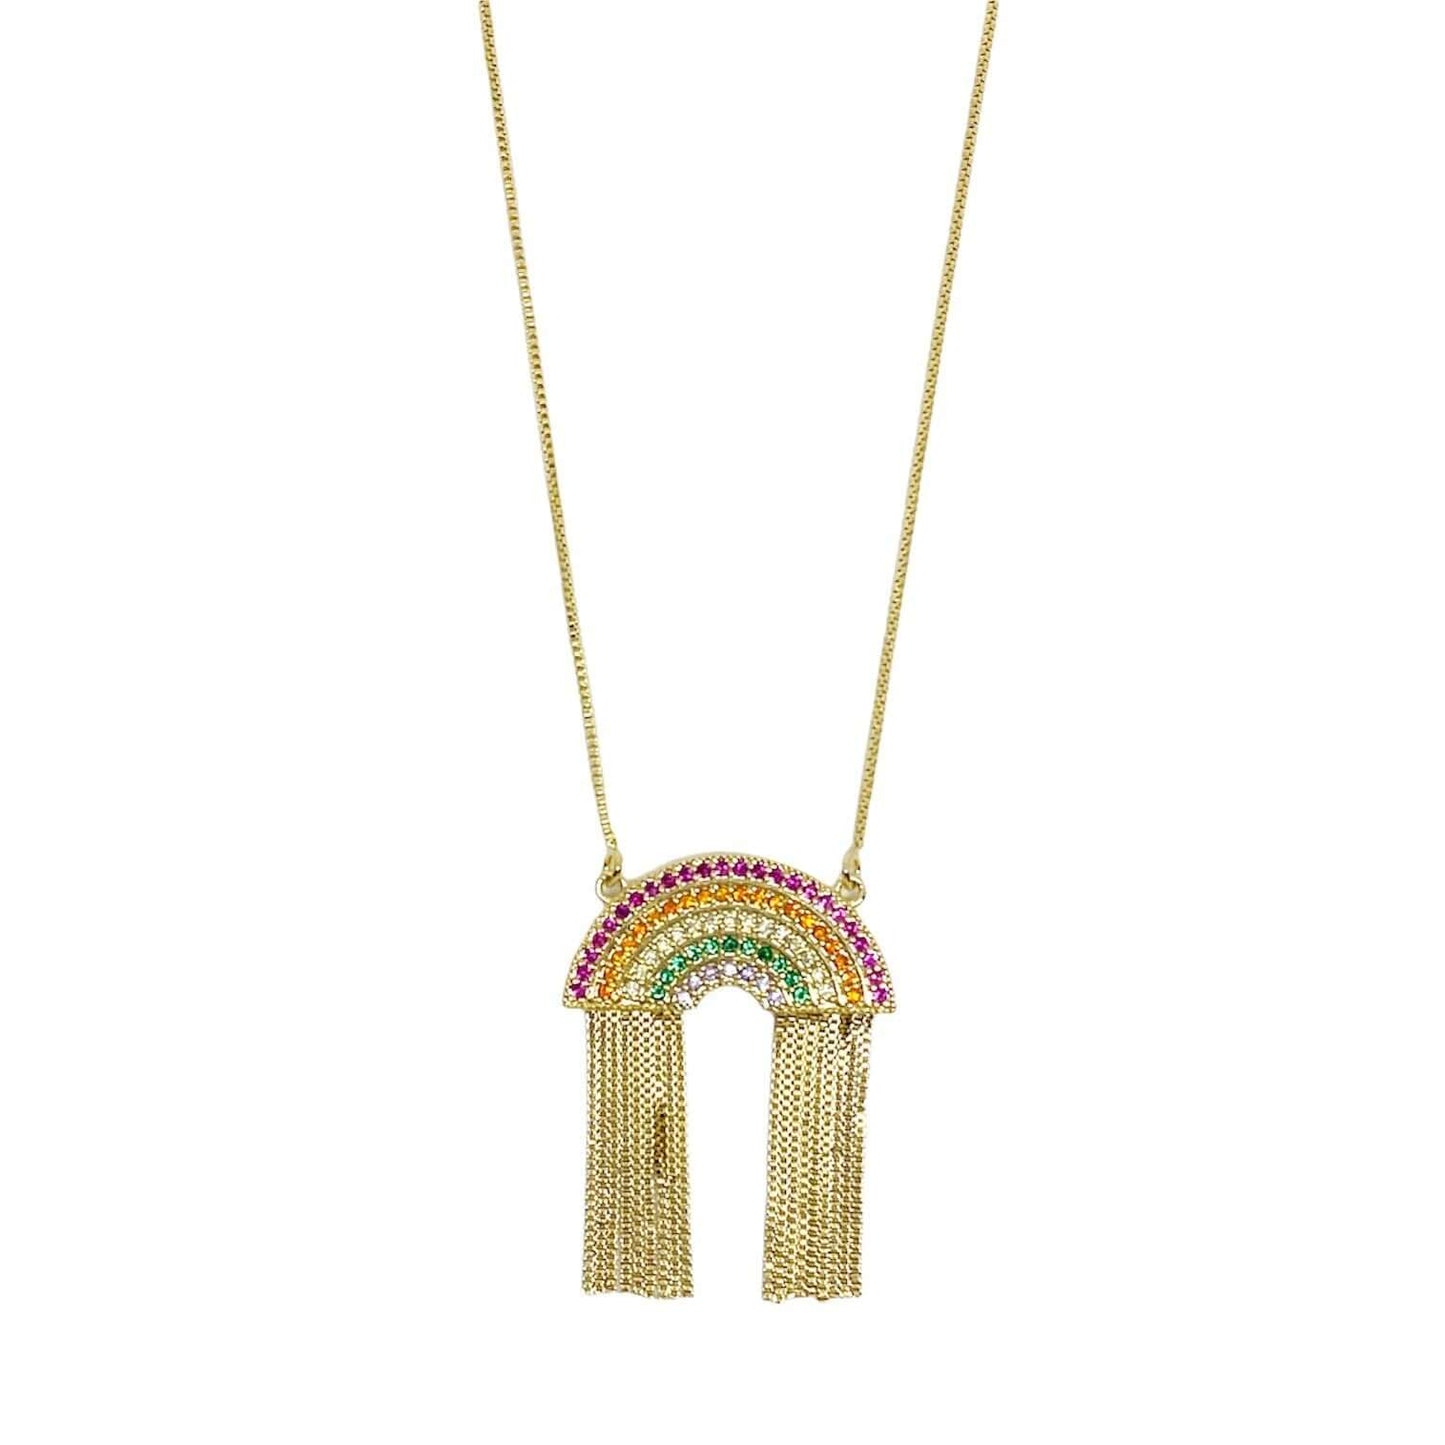 GoldFi Paved Colored Cubic Zirconia Rainbow Necklace 18k Gold Filled